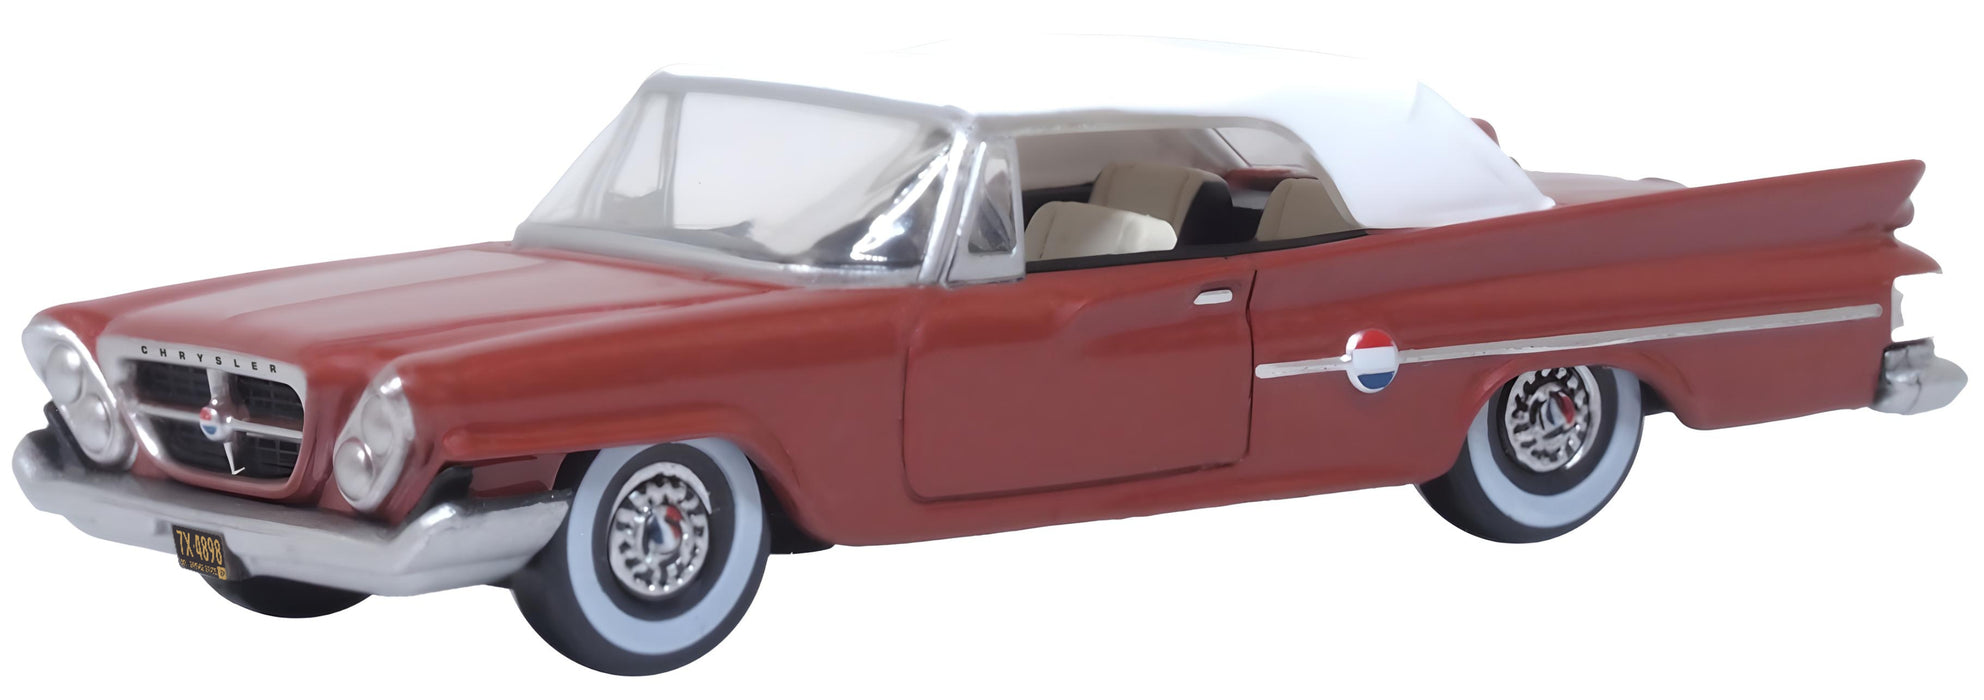 Oxford Diecast Chrysler 300 Convertible 1961 (Closed) Cinnamon/White at 1:87 scale - 87 CC61004